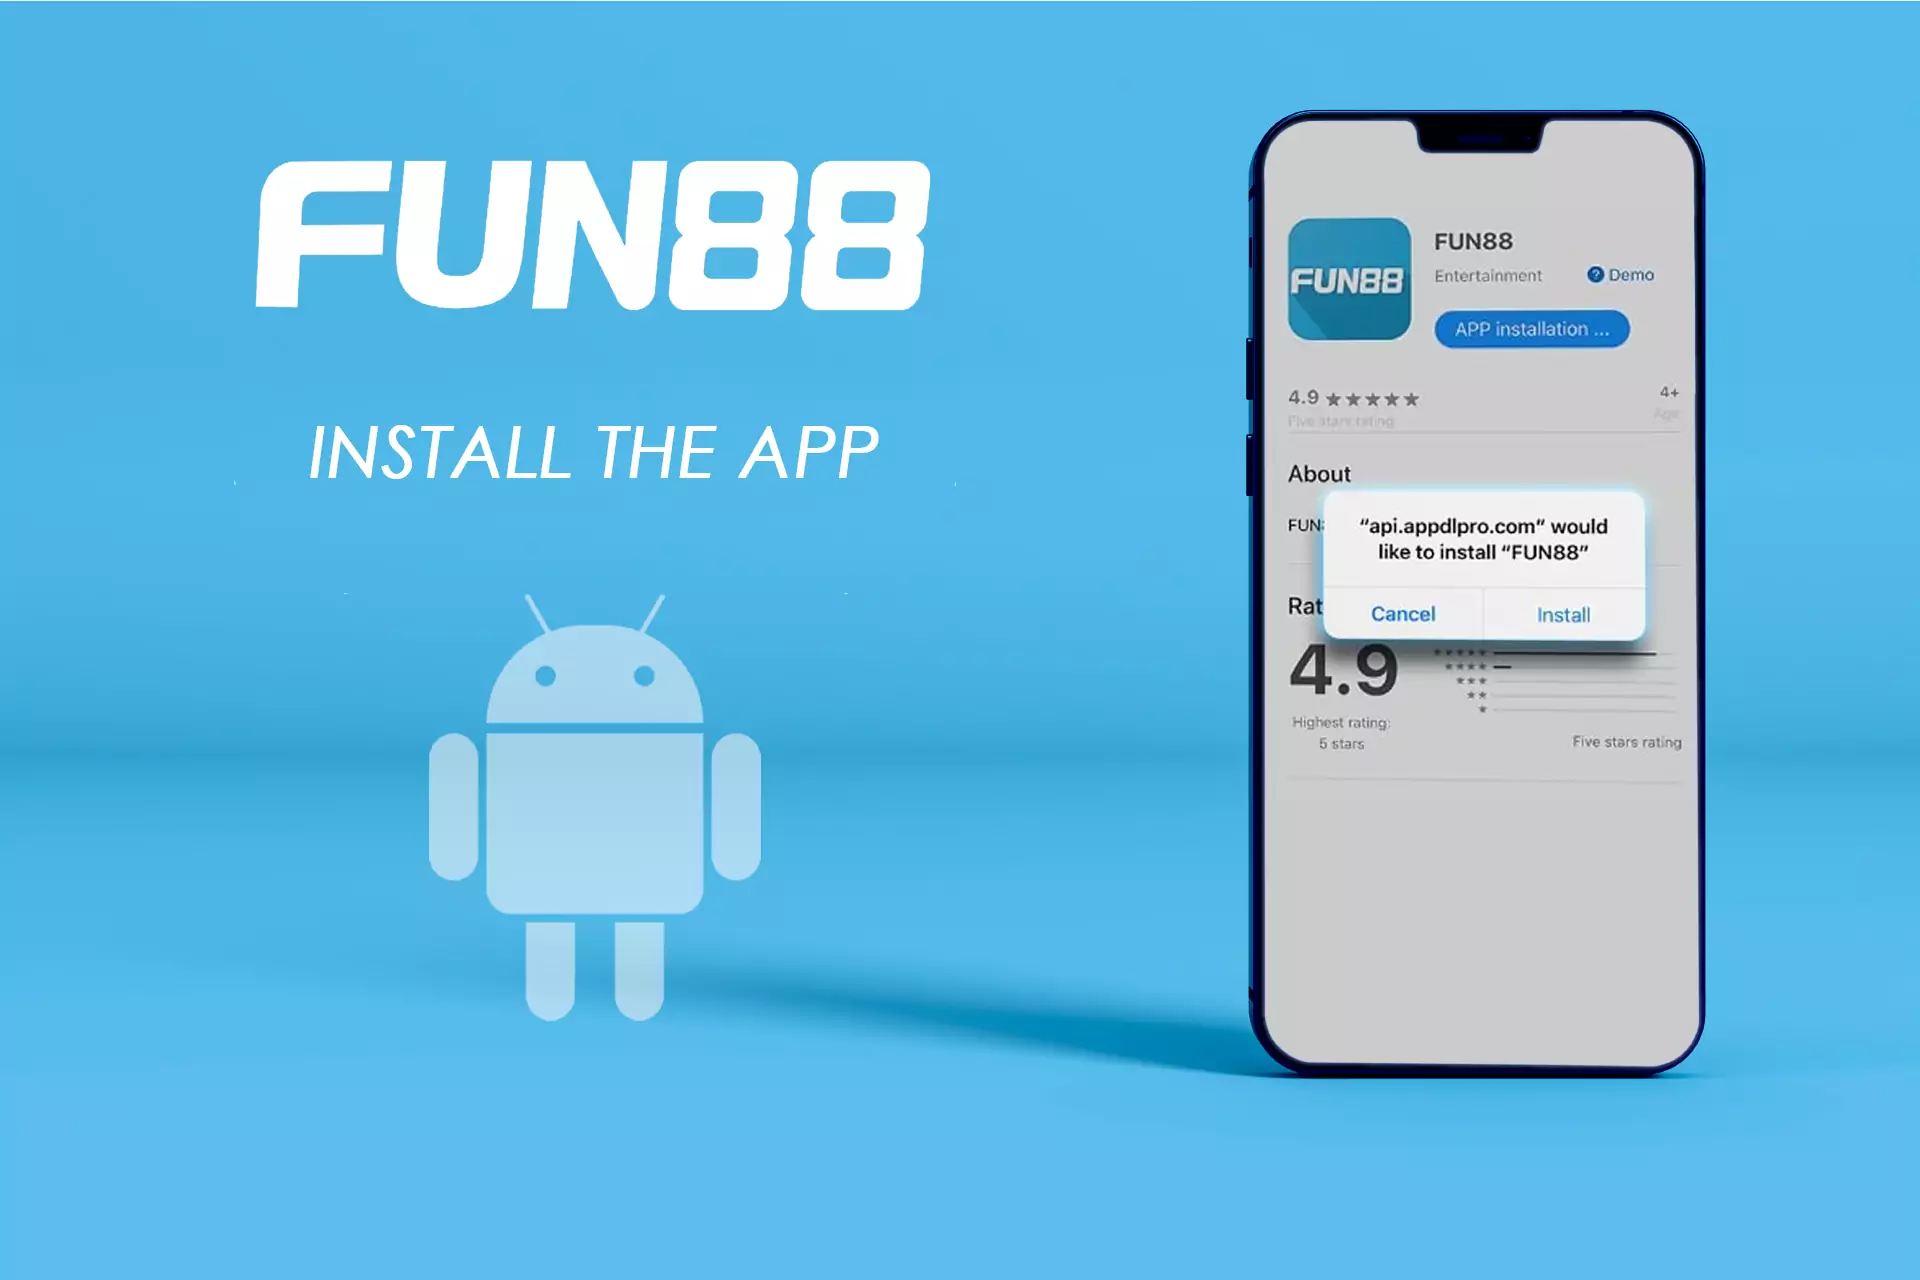 Run the apk file and install the application.